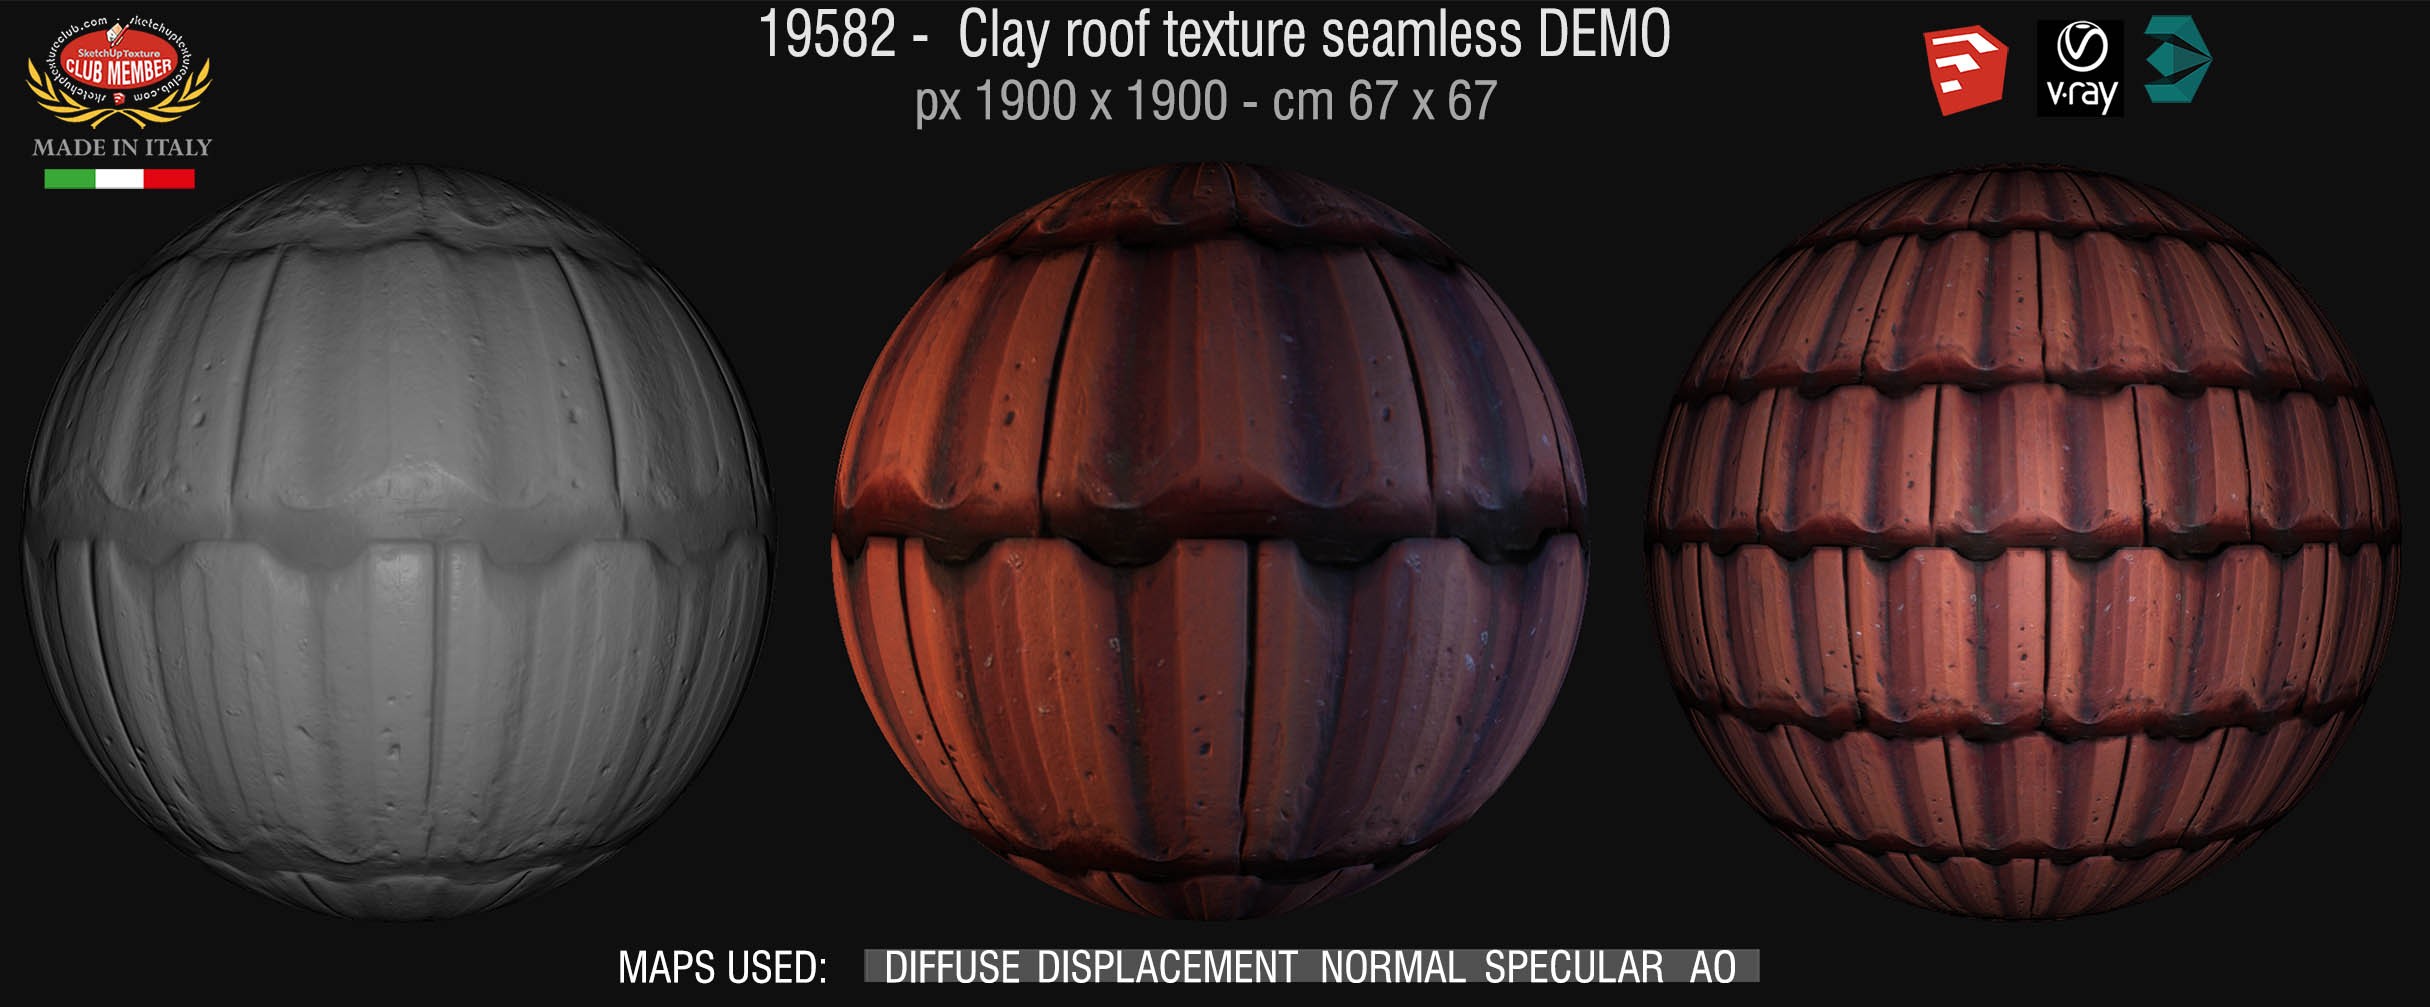 19582 Clay roof texture seamless + maps DEMO